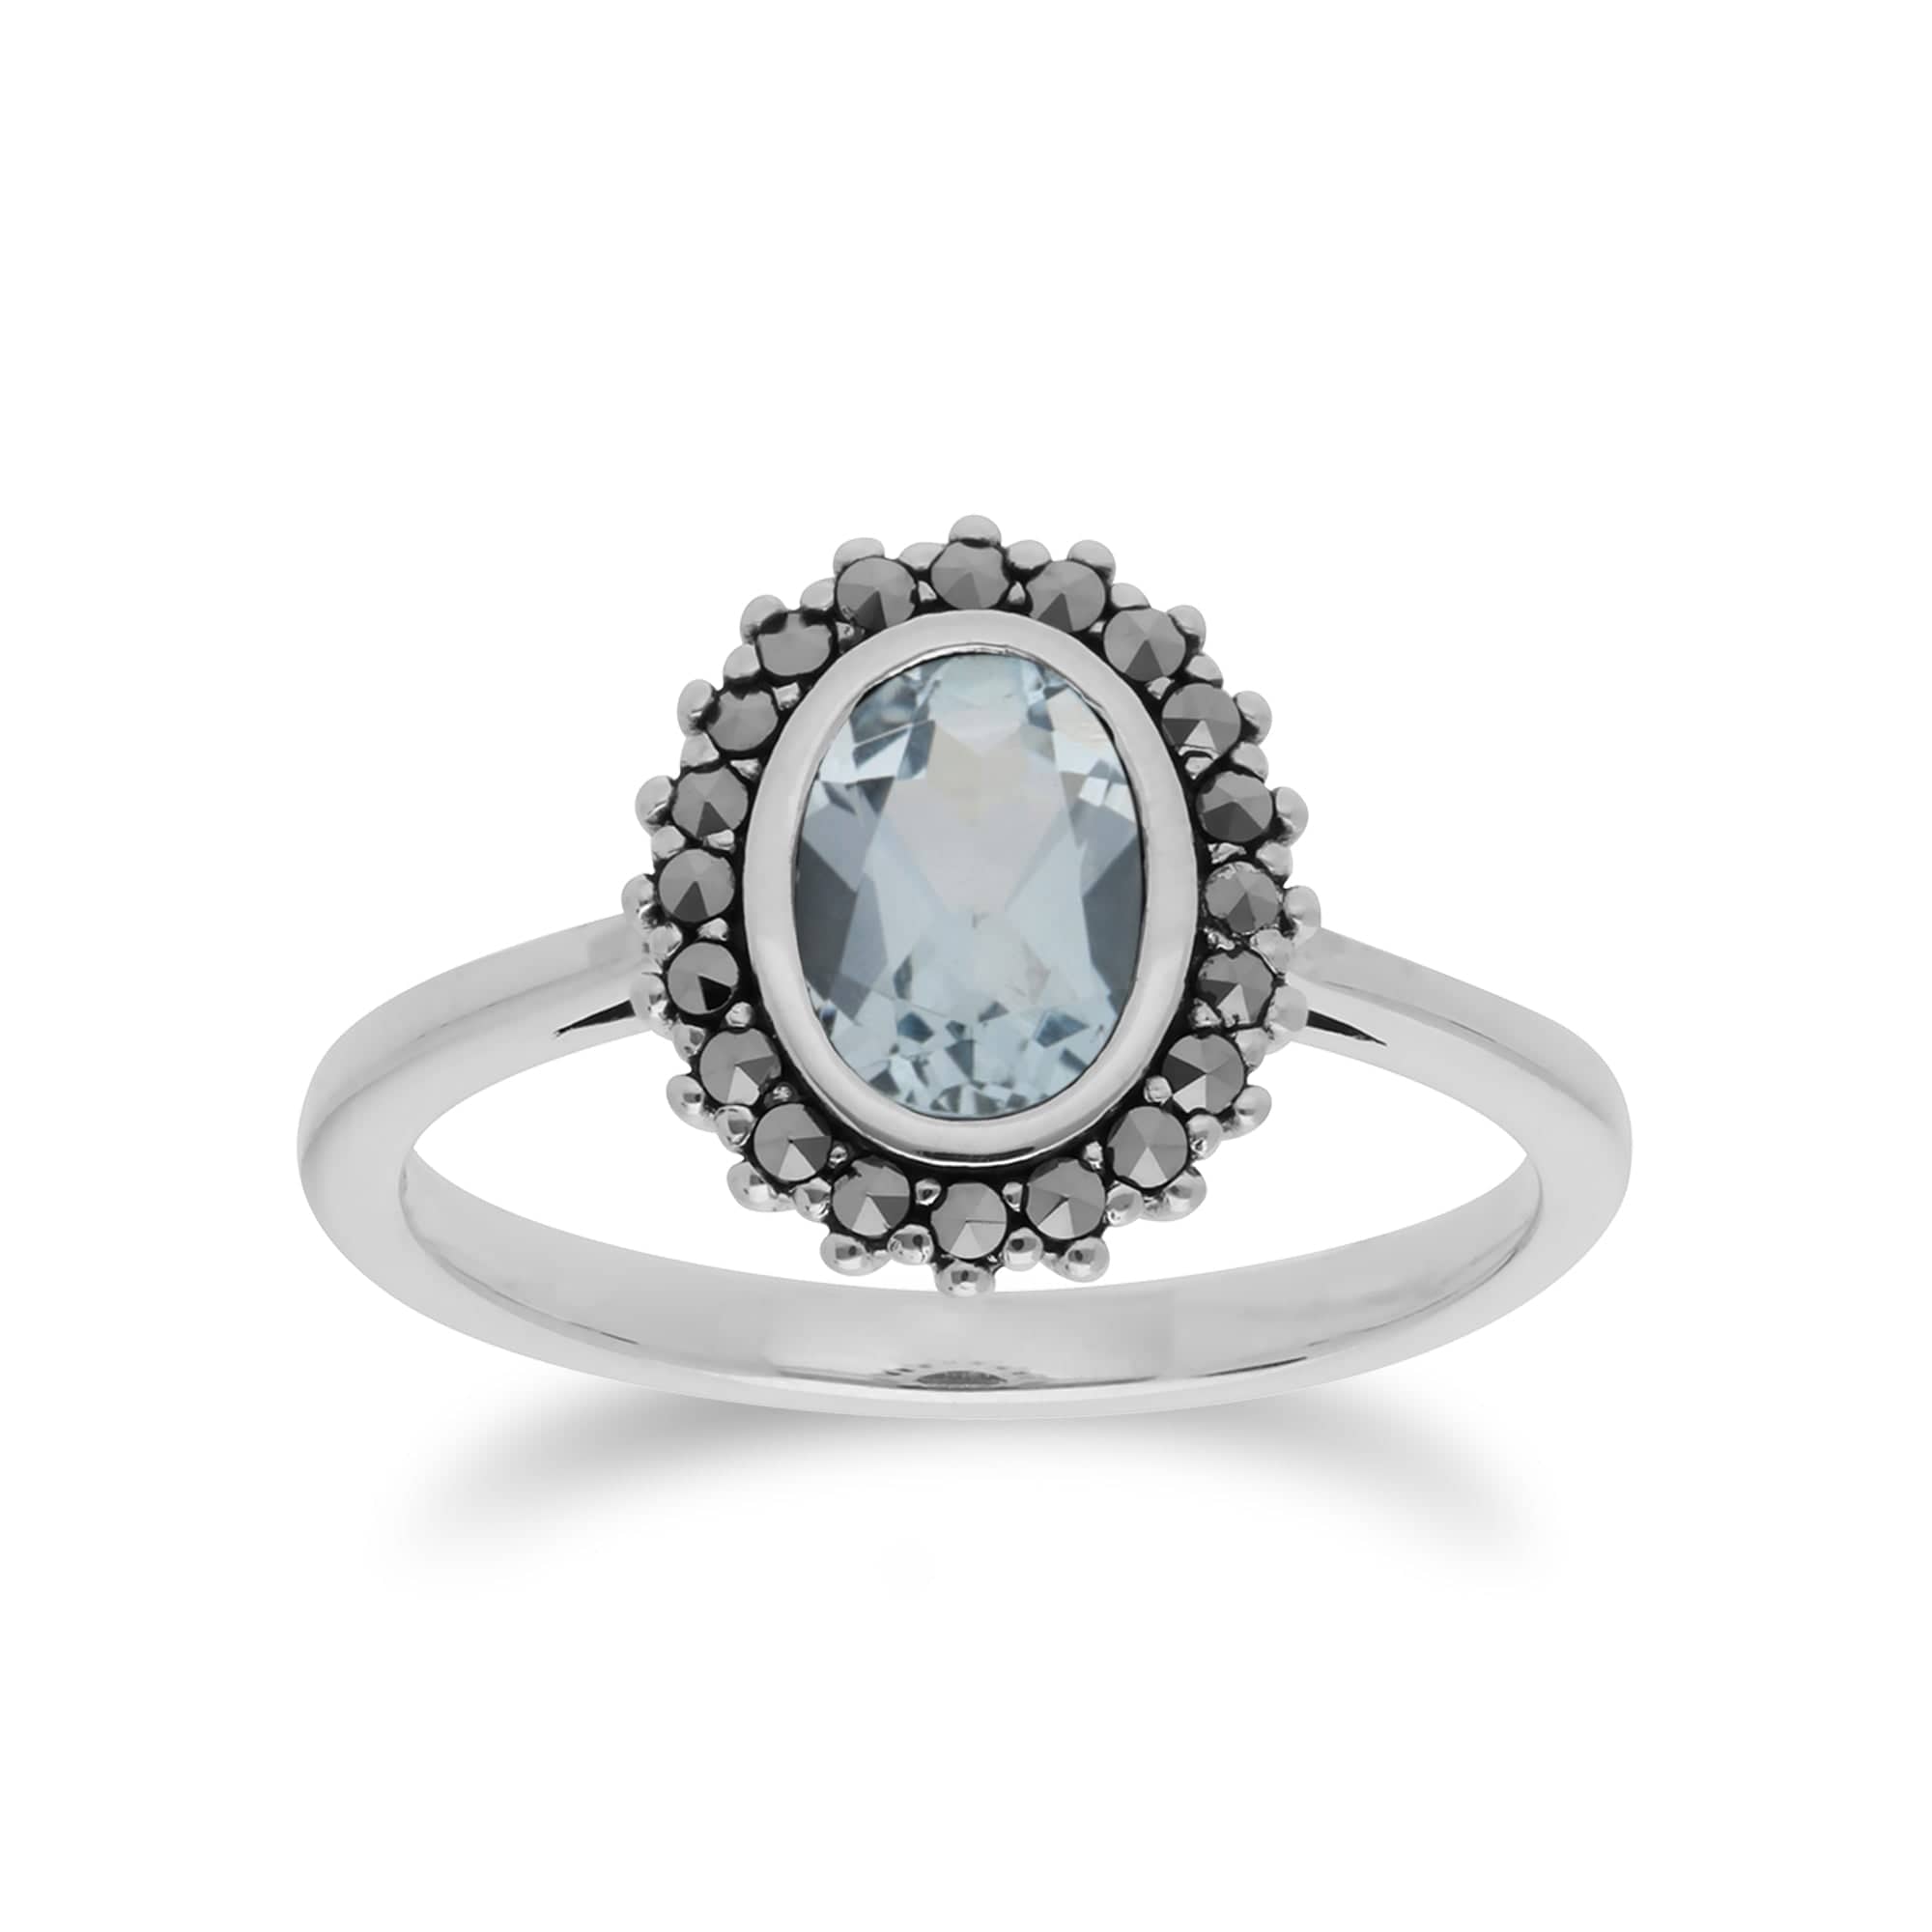 214R599701925 Art Deco Style Oval Blue Topaz & Marcasite Halo Ring in 925 Sterling Silver 1